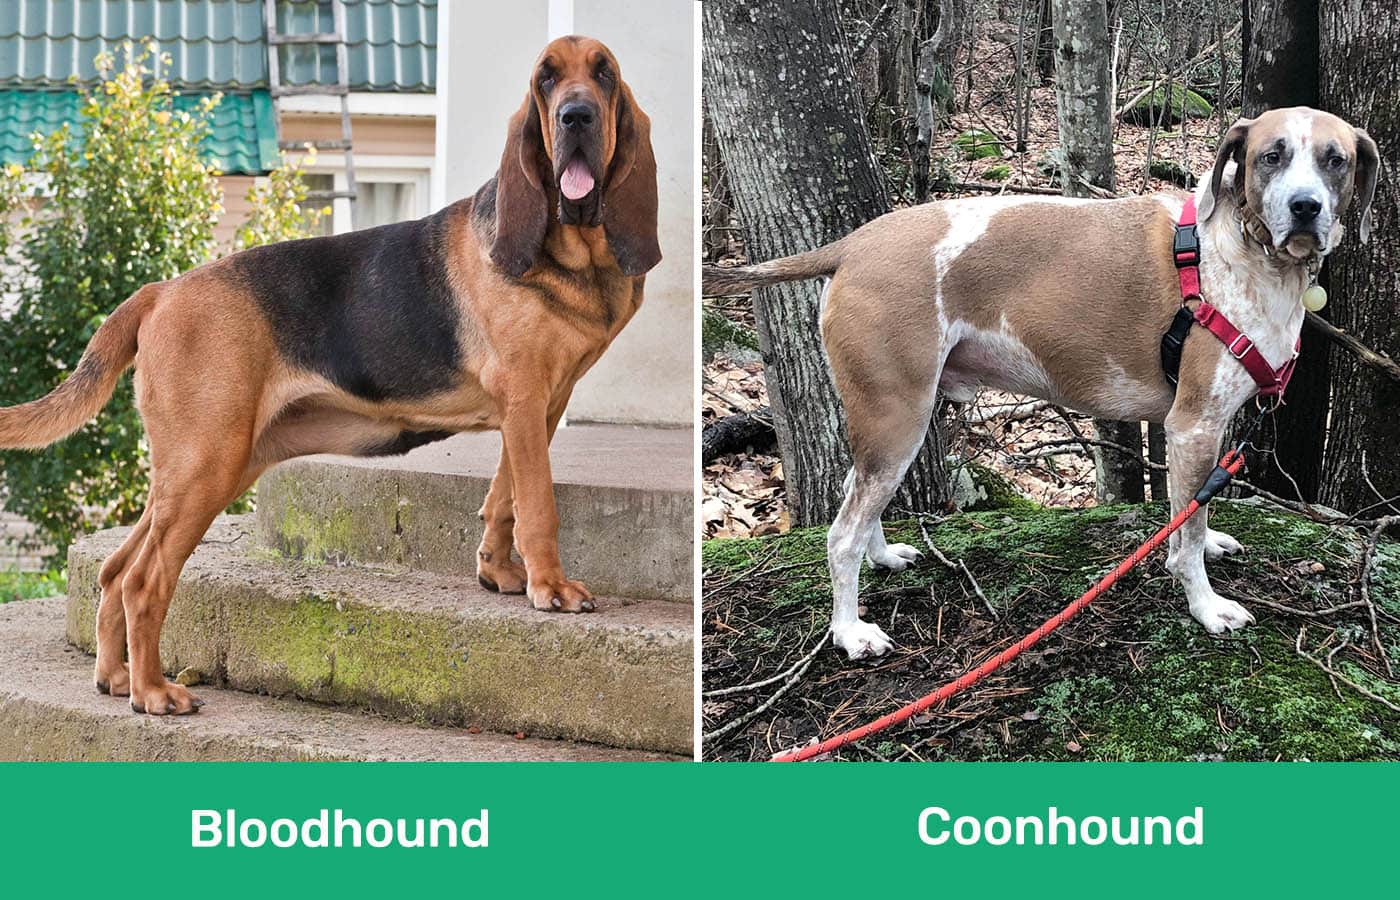 Bloodhound vs Coonhound side by side